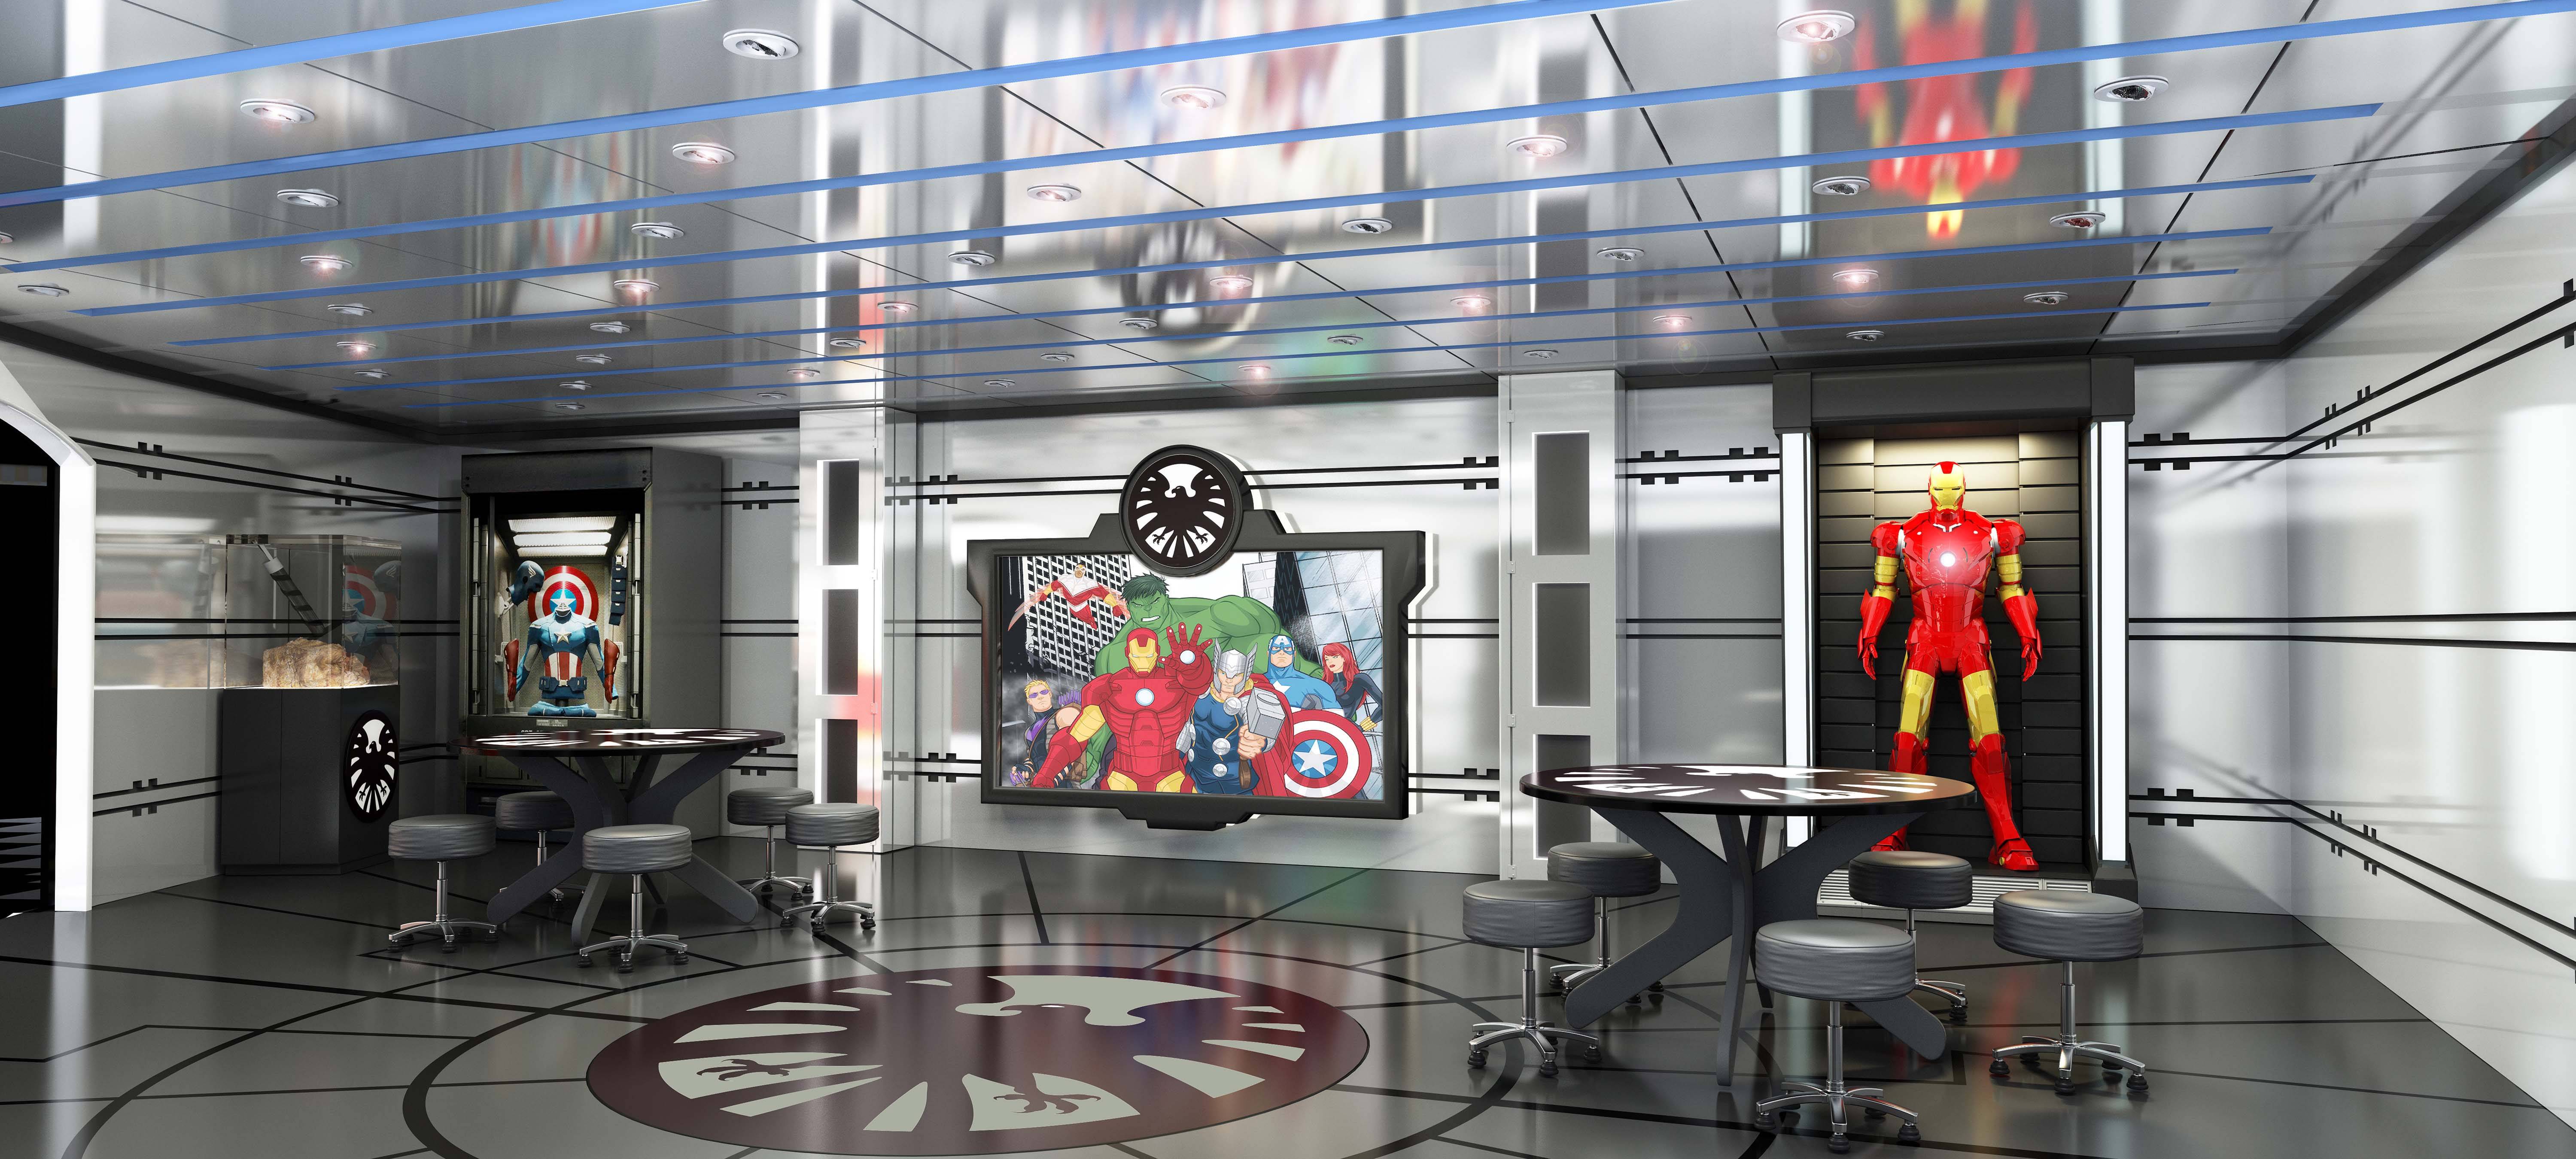 Marvel’s Avengers Academy in Disney’s Oceaneer Club on the Disney Magic invites young crime-fighters into a high-tech command post used by The Avengers for special missions and operations training. Throughout the base, displays featuring some of the equipment that make The Avengers the earth’s mightiest heroes – Iron Man’s suit of armor, Captain America’s shield and Thor’s hammer — inspire super hero “recruits” through their academy missions.